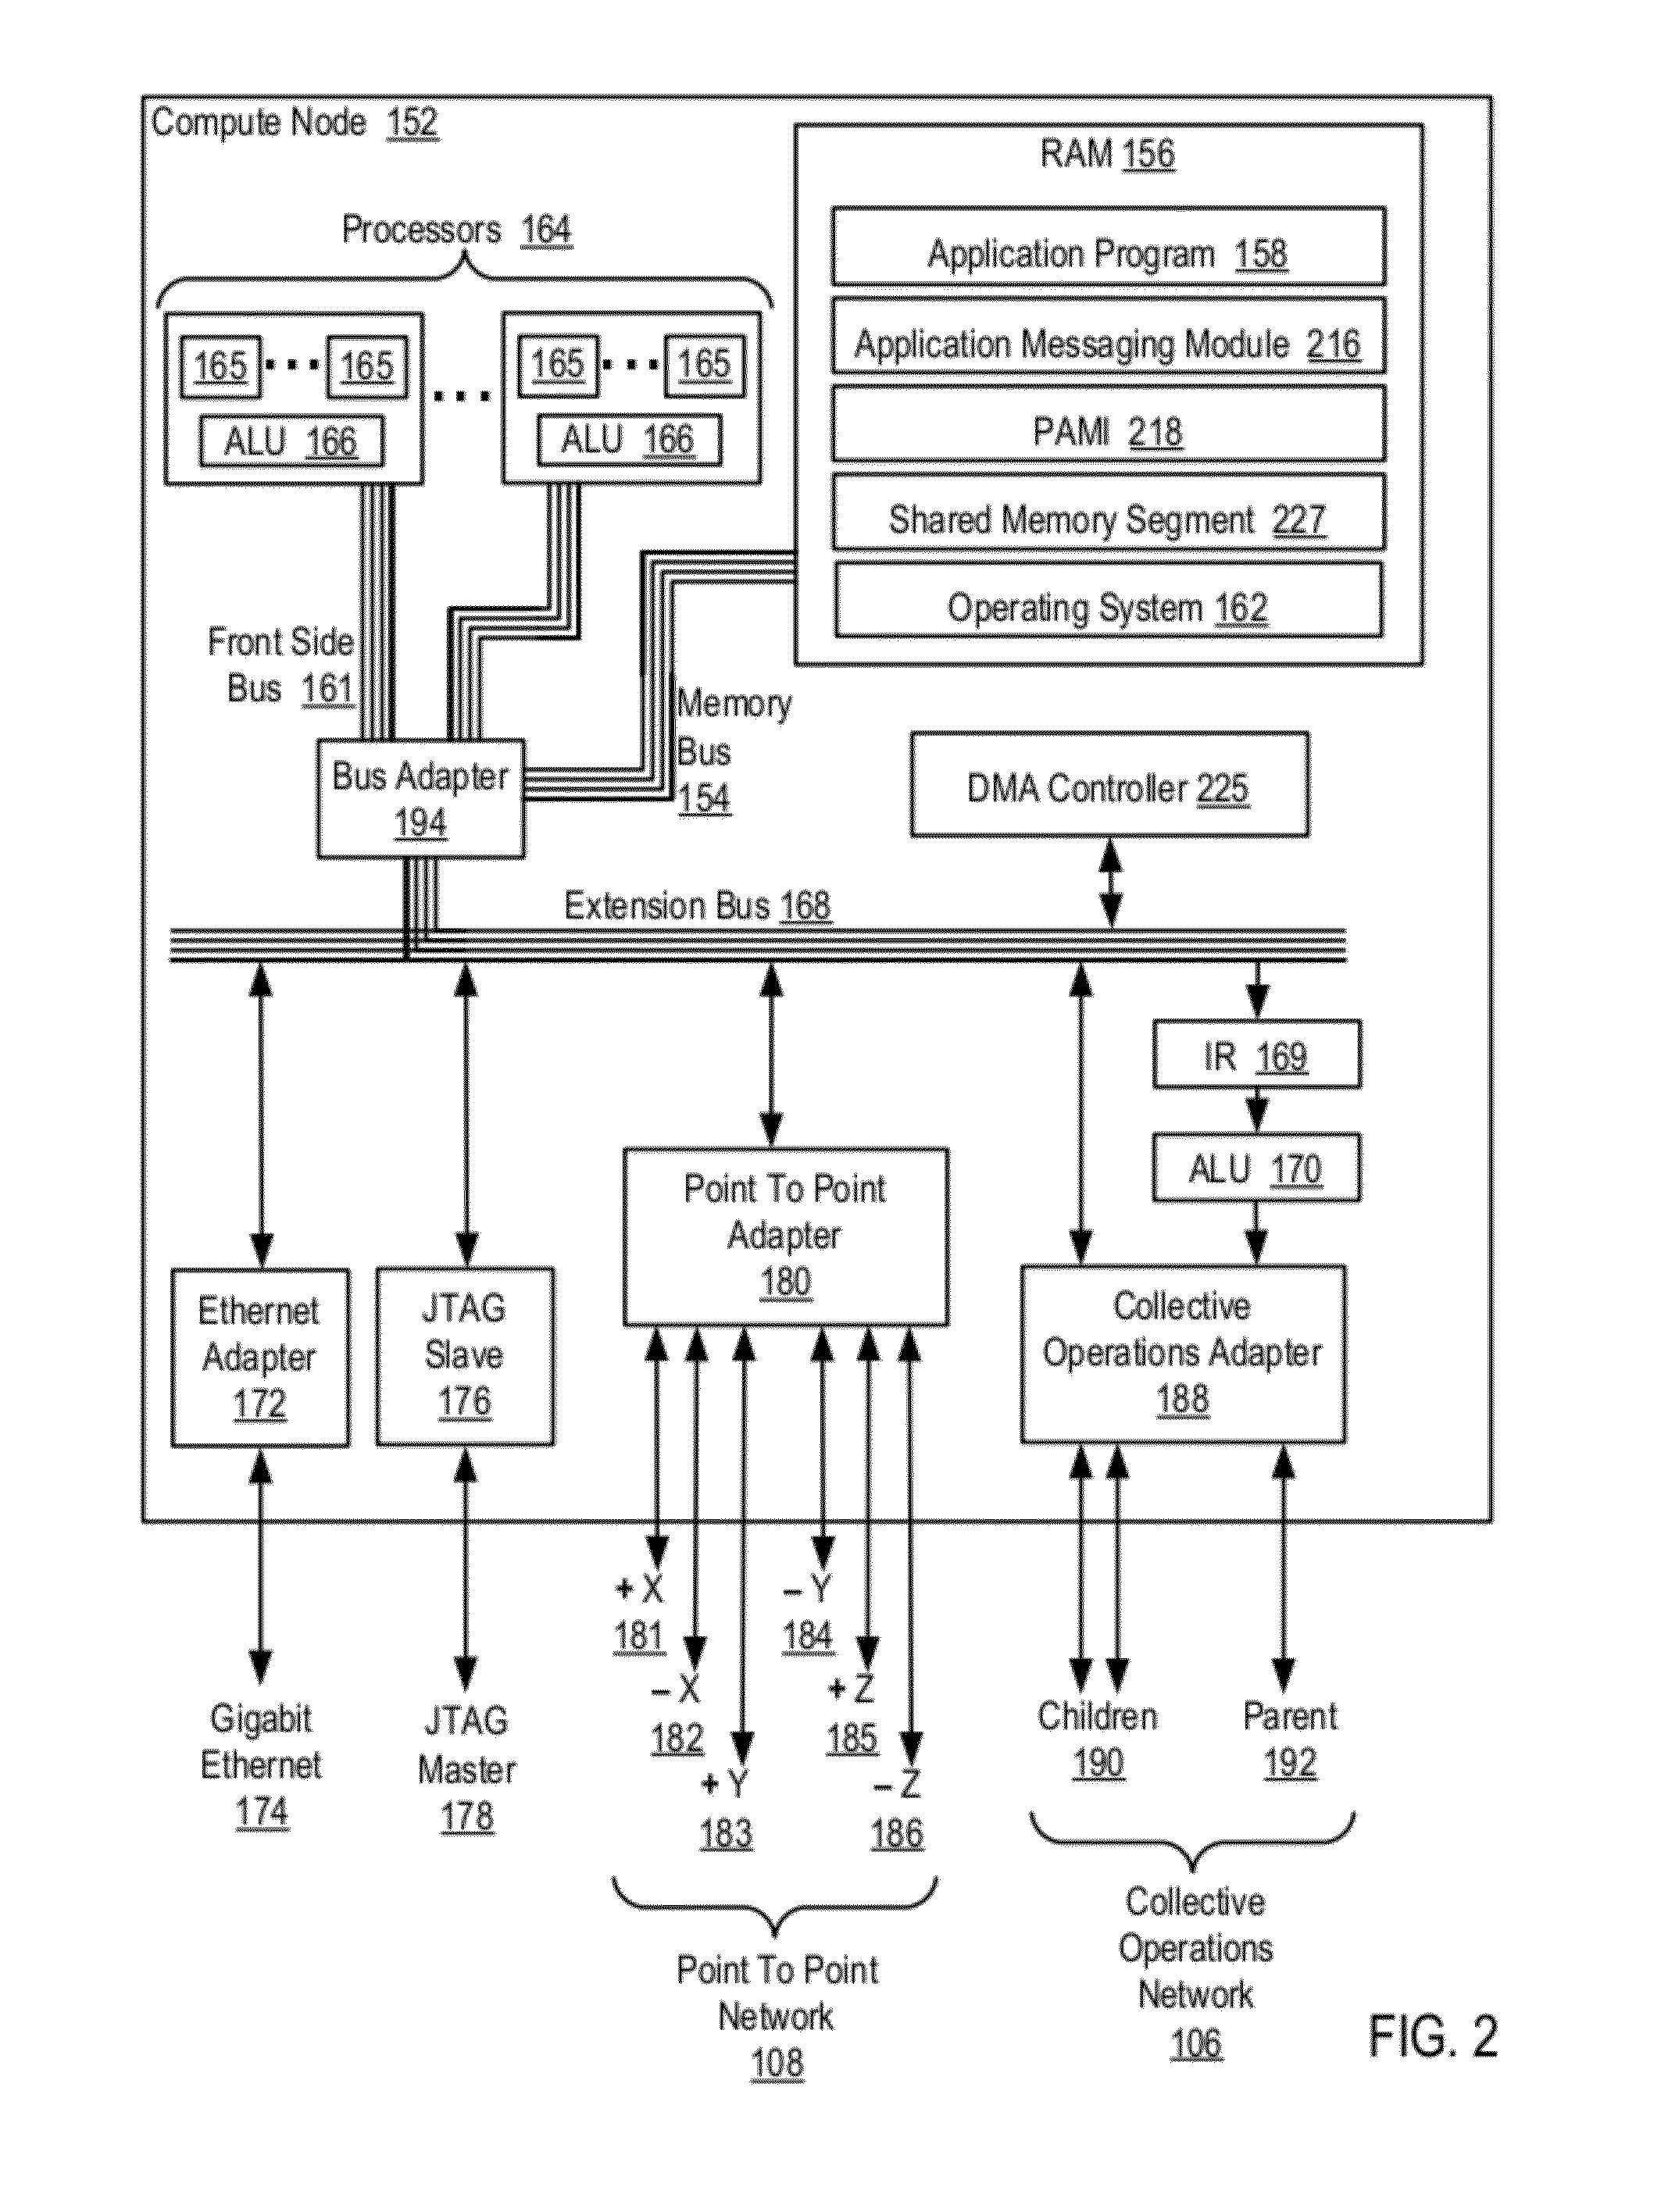 Processing Data Communications Events In A Parallel Active Messaging Interface Of A Parallel Computer